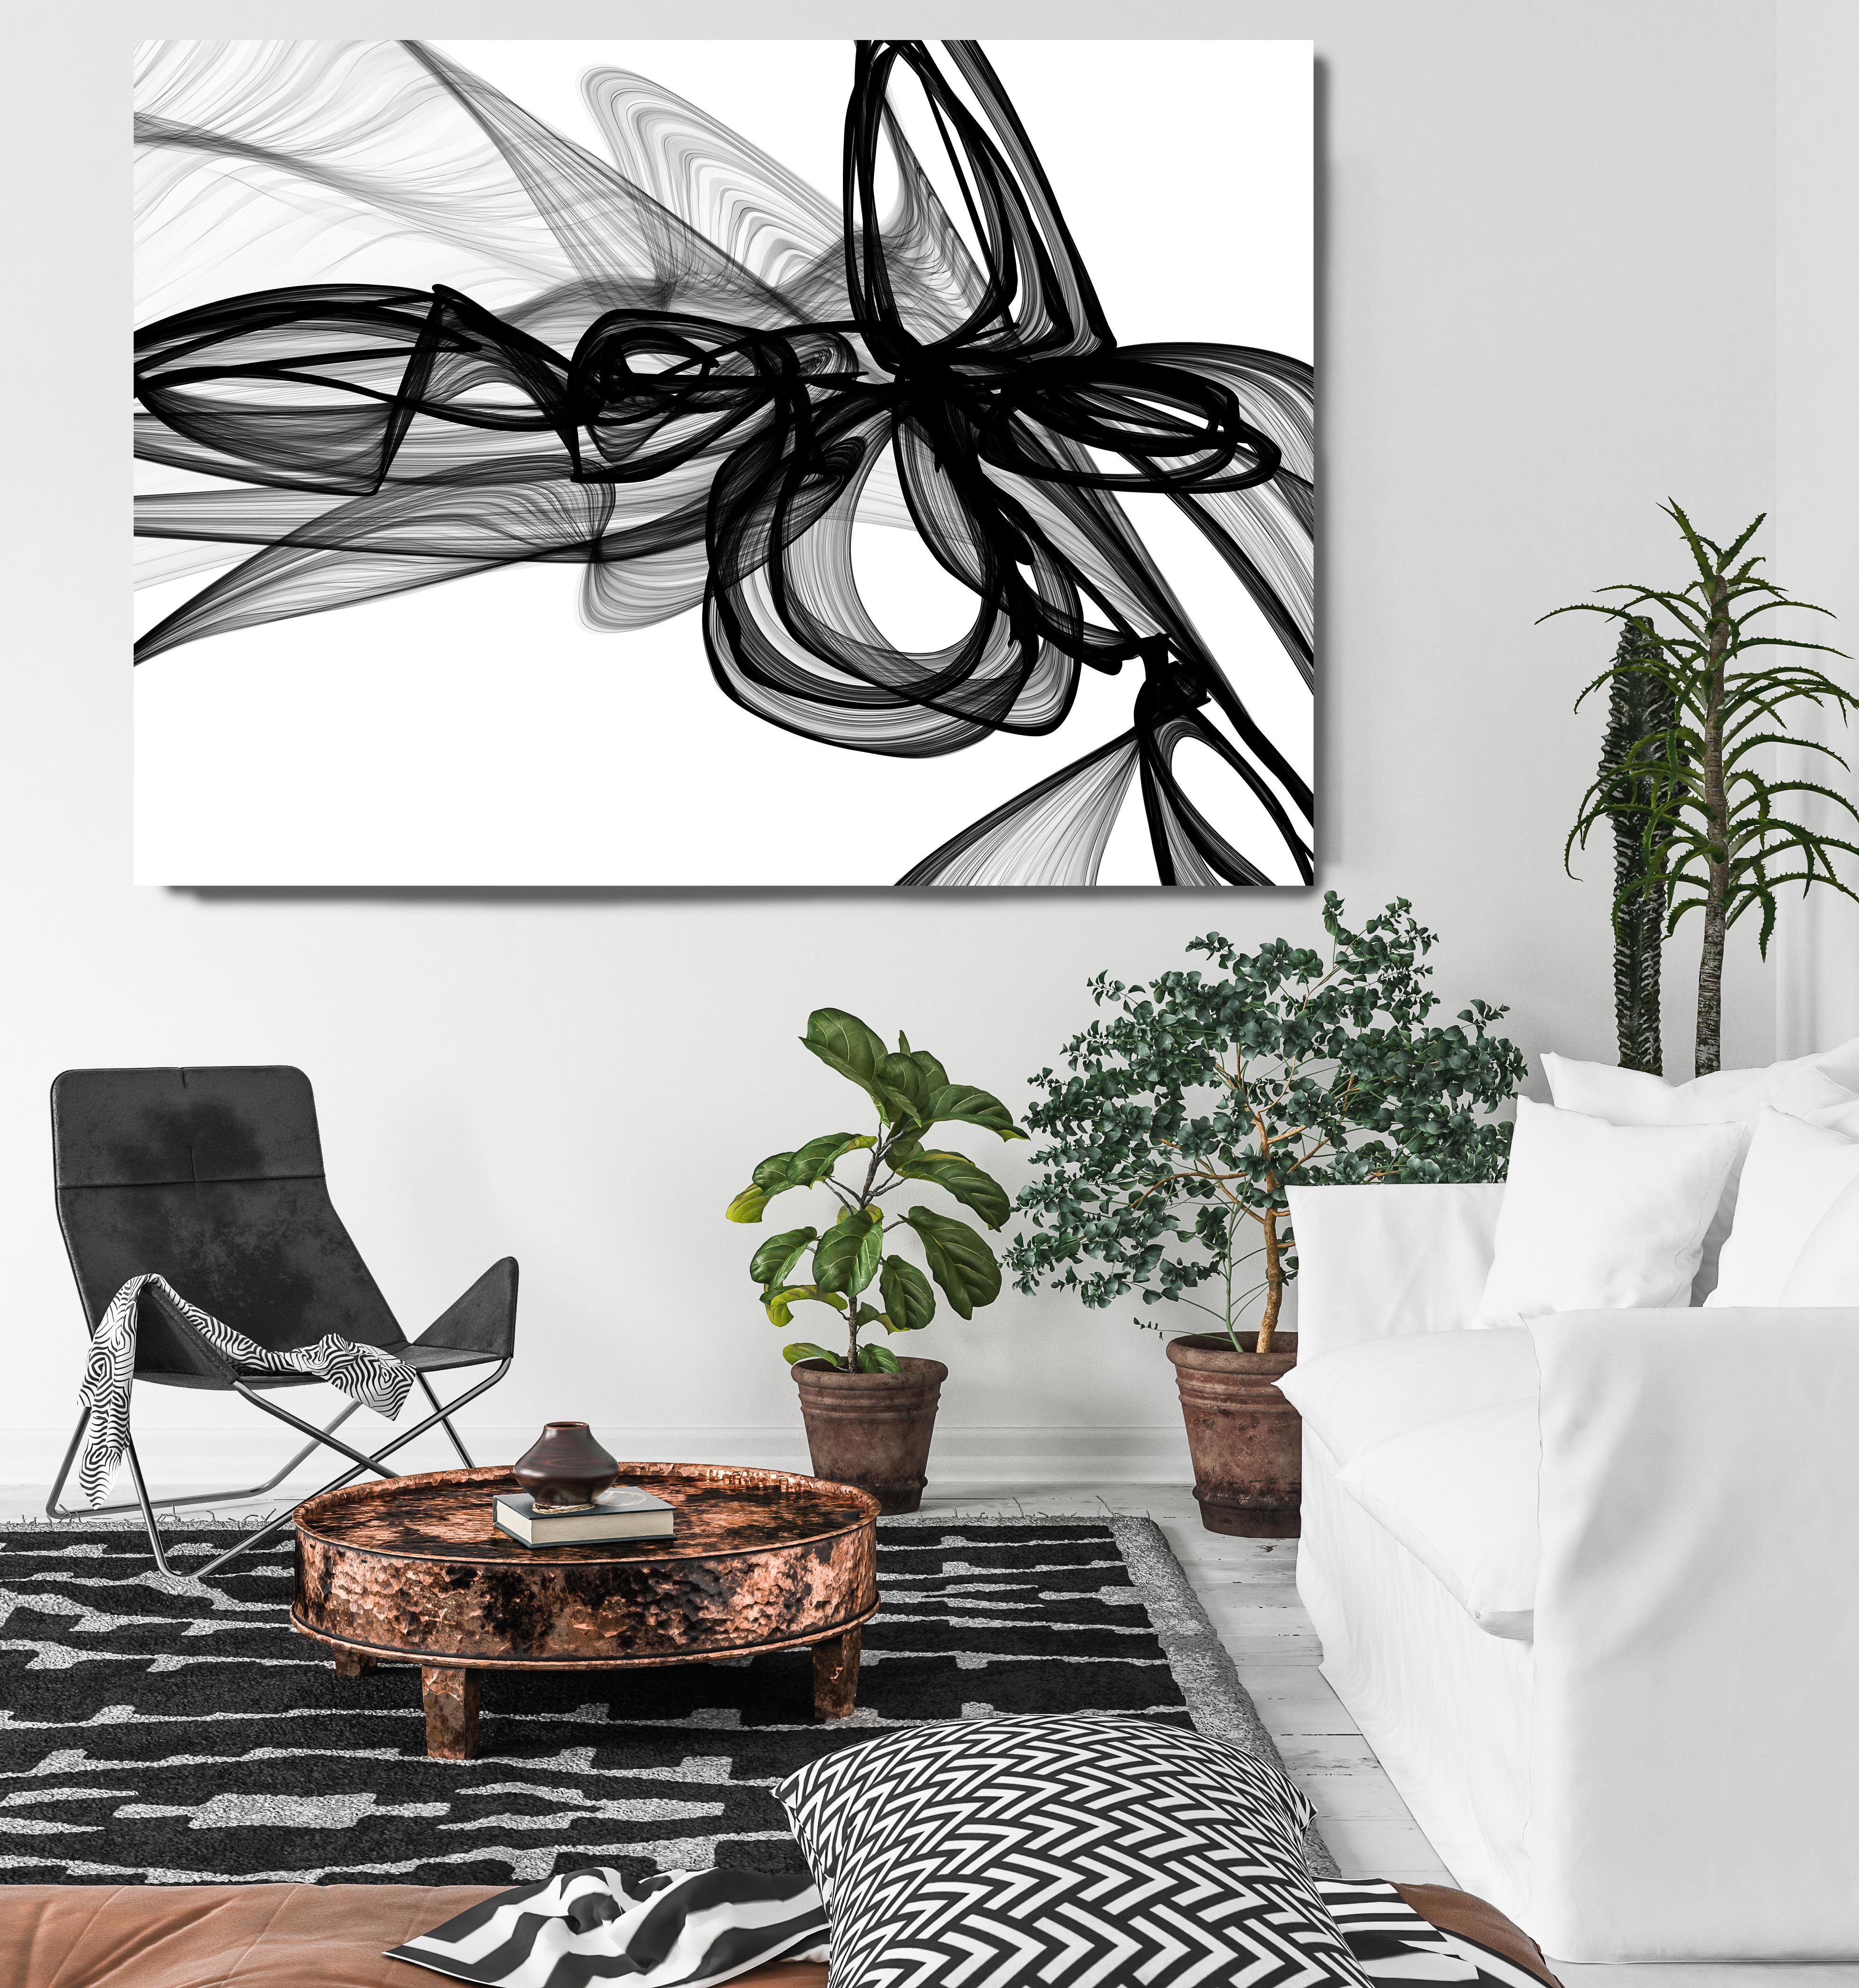 Irena Orlov Interior Painting - Black White Minimalist New Media Painting on Canvas, 60x45" Me in my own world